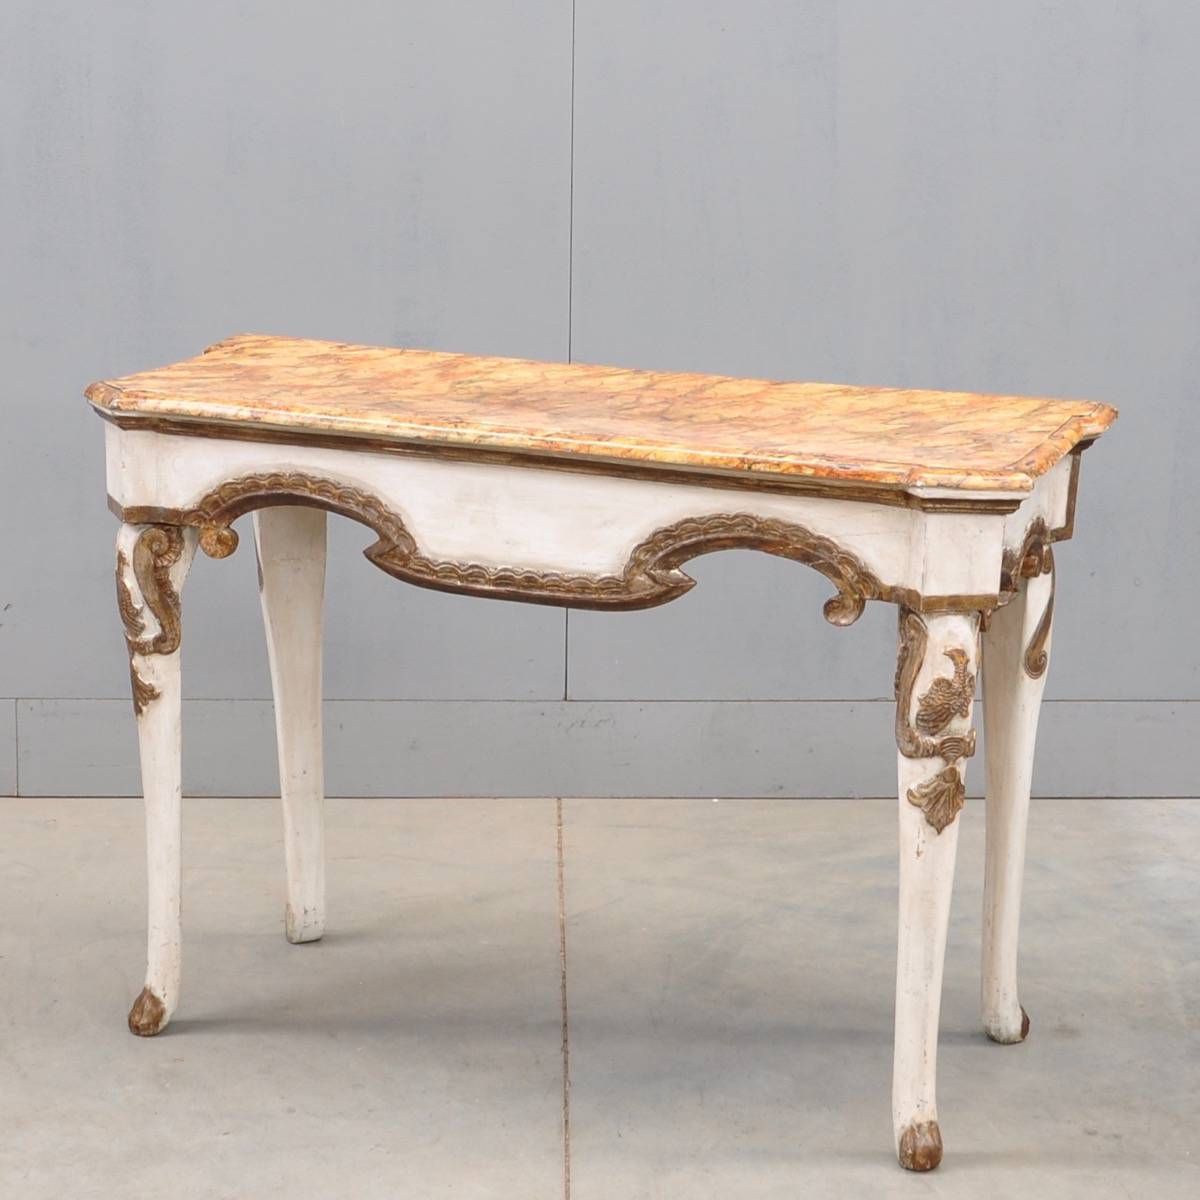 White & Gold Polychrome Console Table | De Grande Antique Throughout Antiqued Gold Rectangular Console Tables (View 20 of 20)